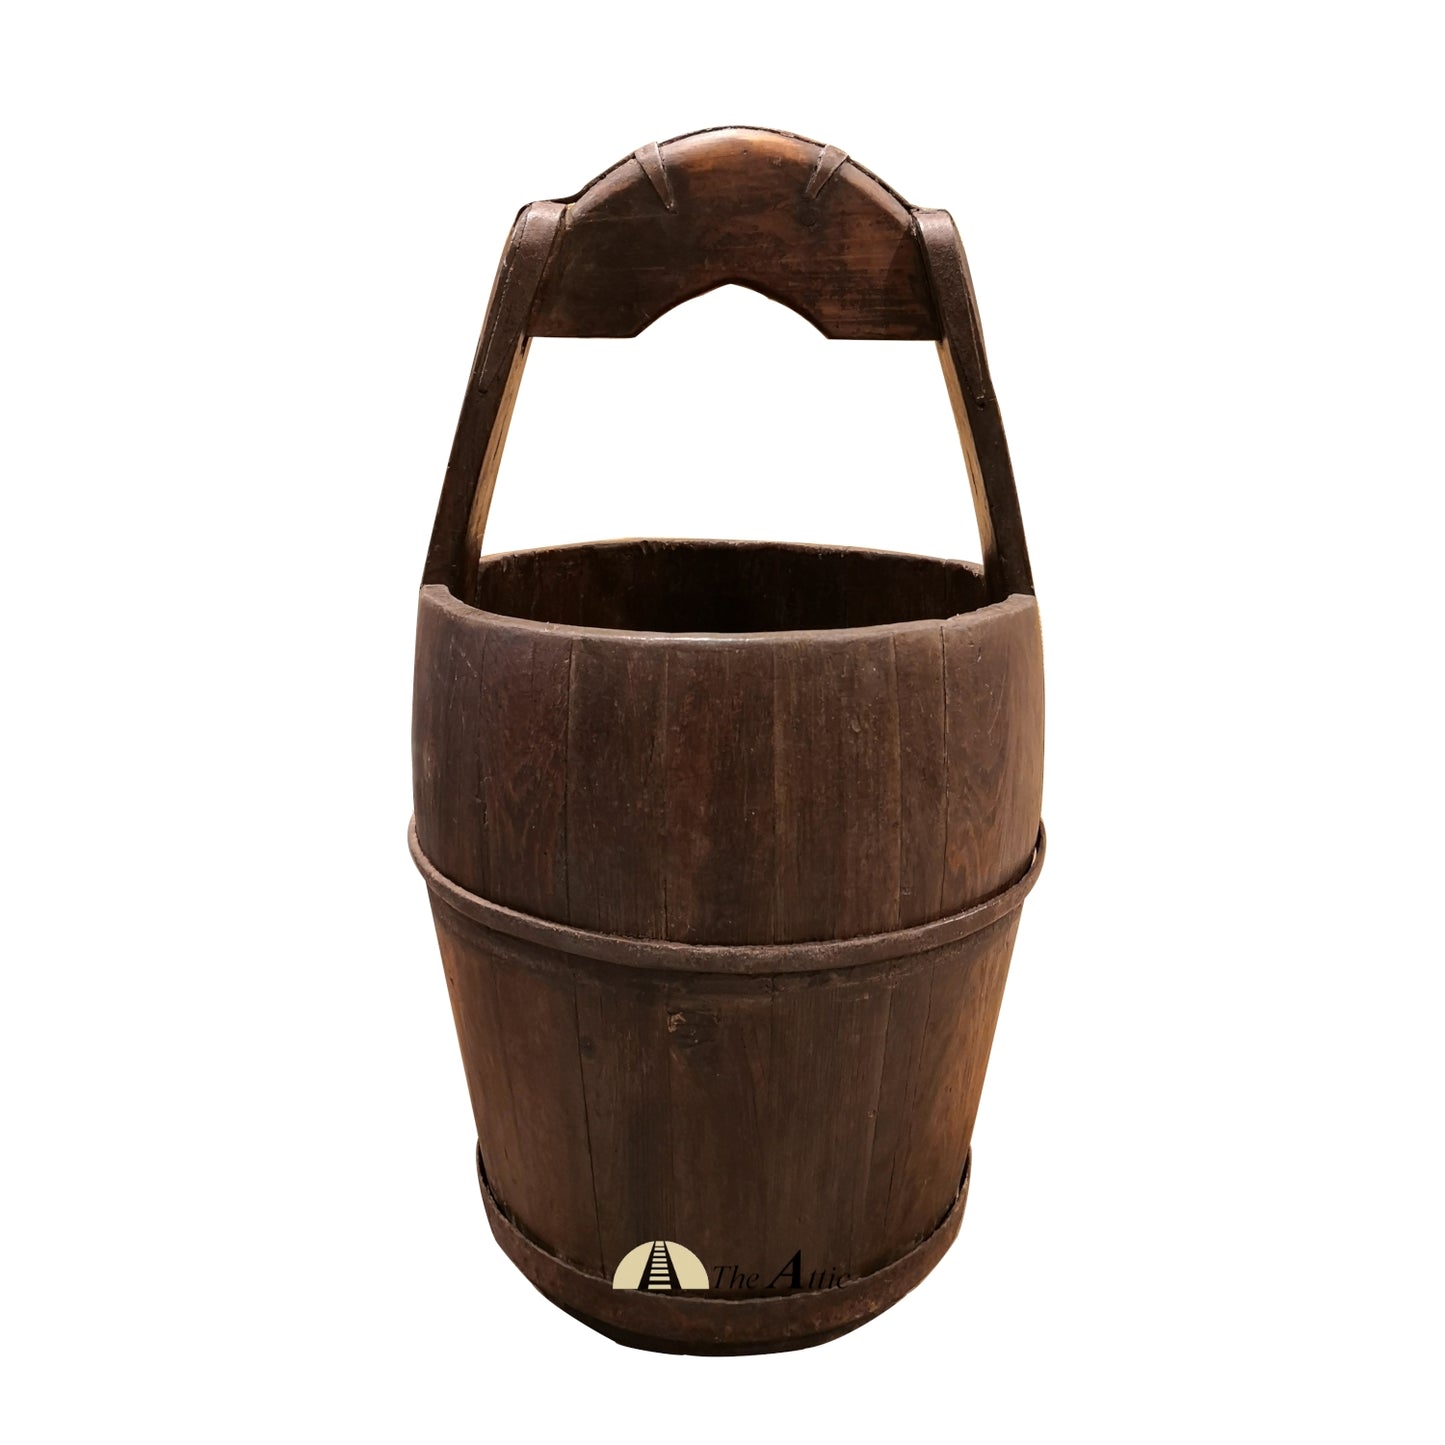 Vintage Chinese Wooden Water Bucket - The Attic Dubai